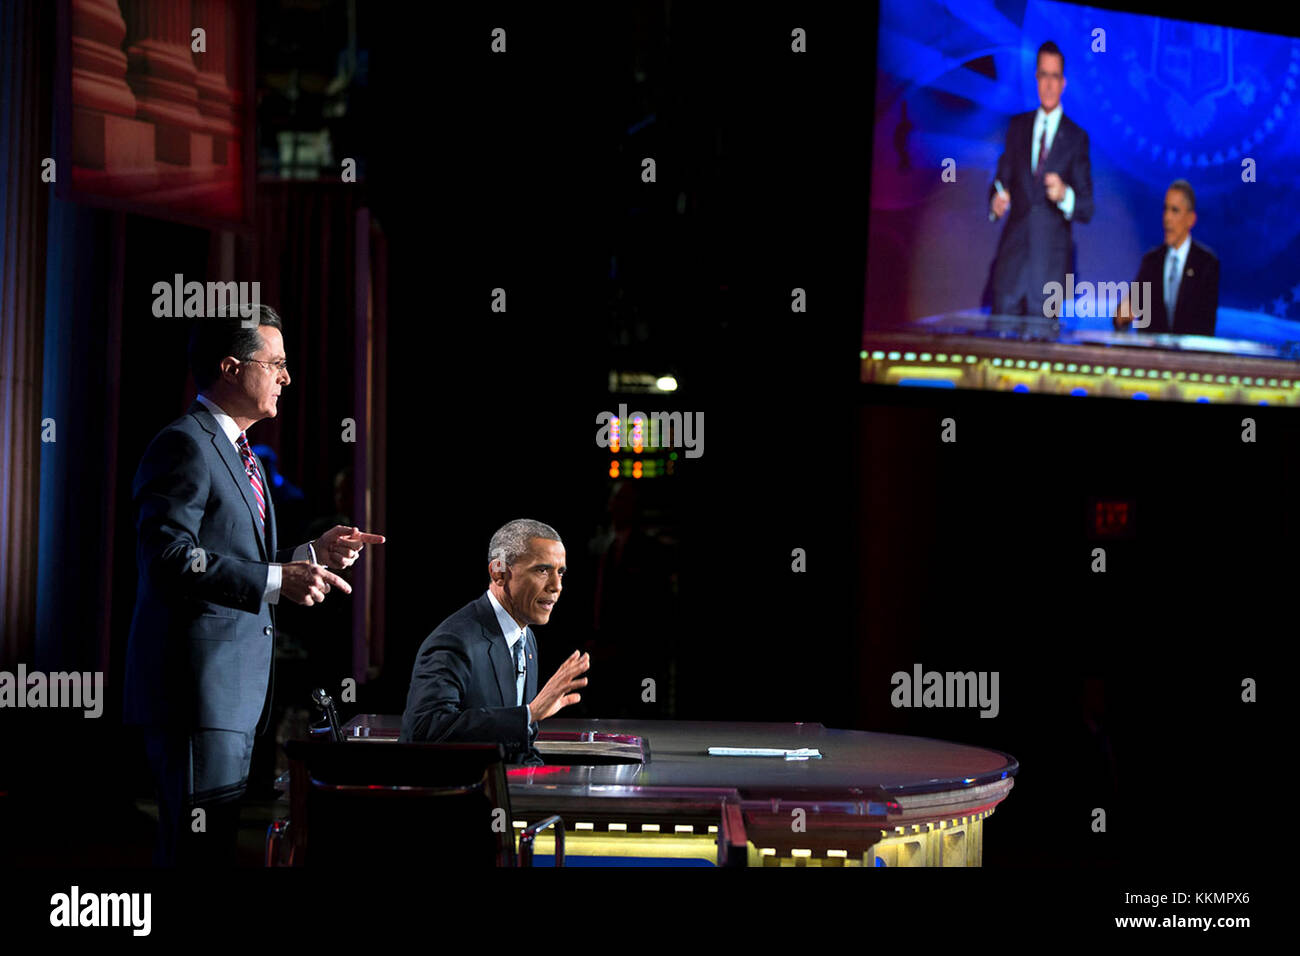 President Barack Obama takes over for Stephen Colbert during 'The Word' segment of 'The Colbert Report with Stephen Colbert' during a taping at George Washington University's Lisner Auditorium in Washington, D.C., Dec. 8, 2014. (Official White House Photo by Pete Souza)  This official White House photograph is being made available only for publication by news organizations and/or for personal use printing by the subject(s) of the photograph. The photograph may not be manipulated in any way and may not be used in commercial or political materials, advertisements, emails, products, promotions th Stock Photo